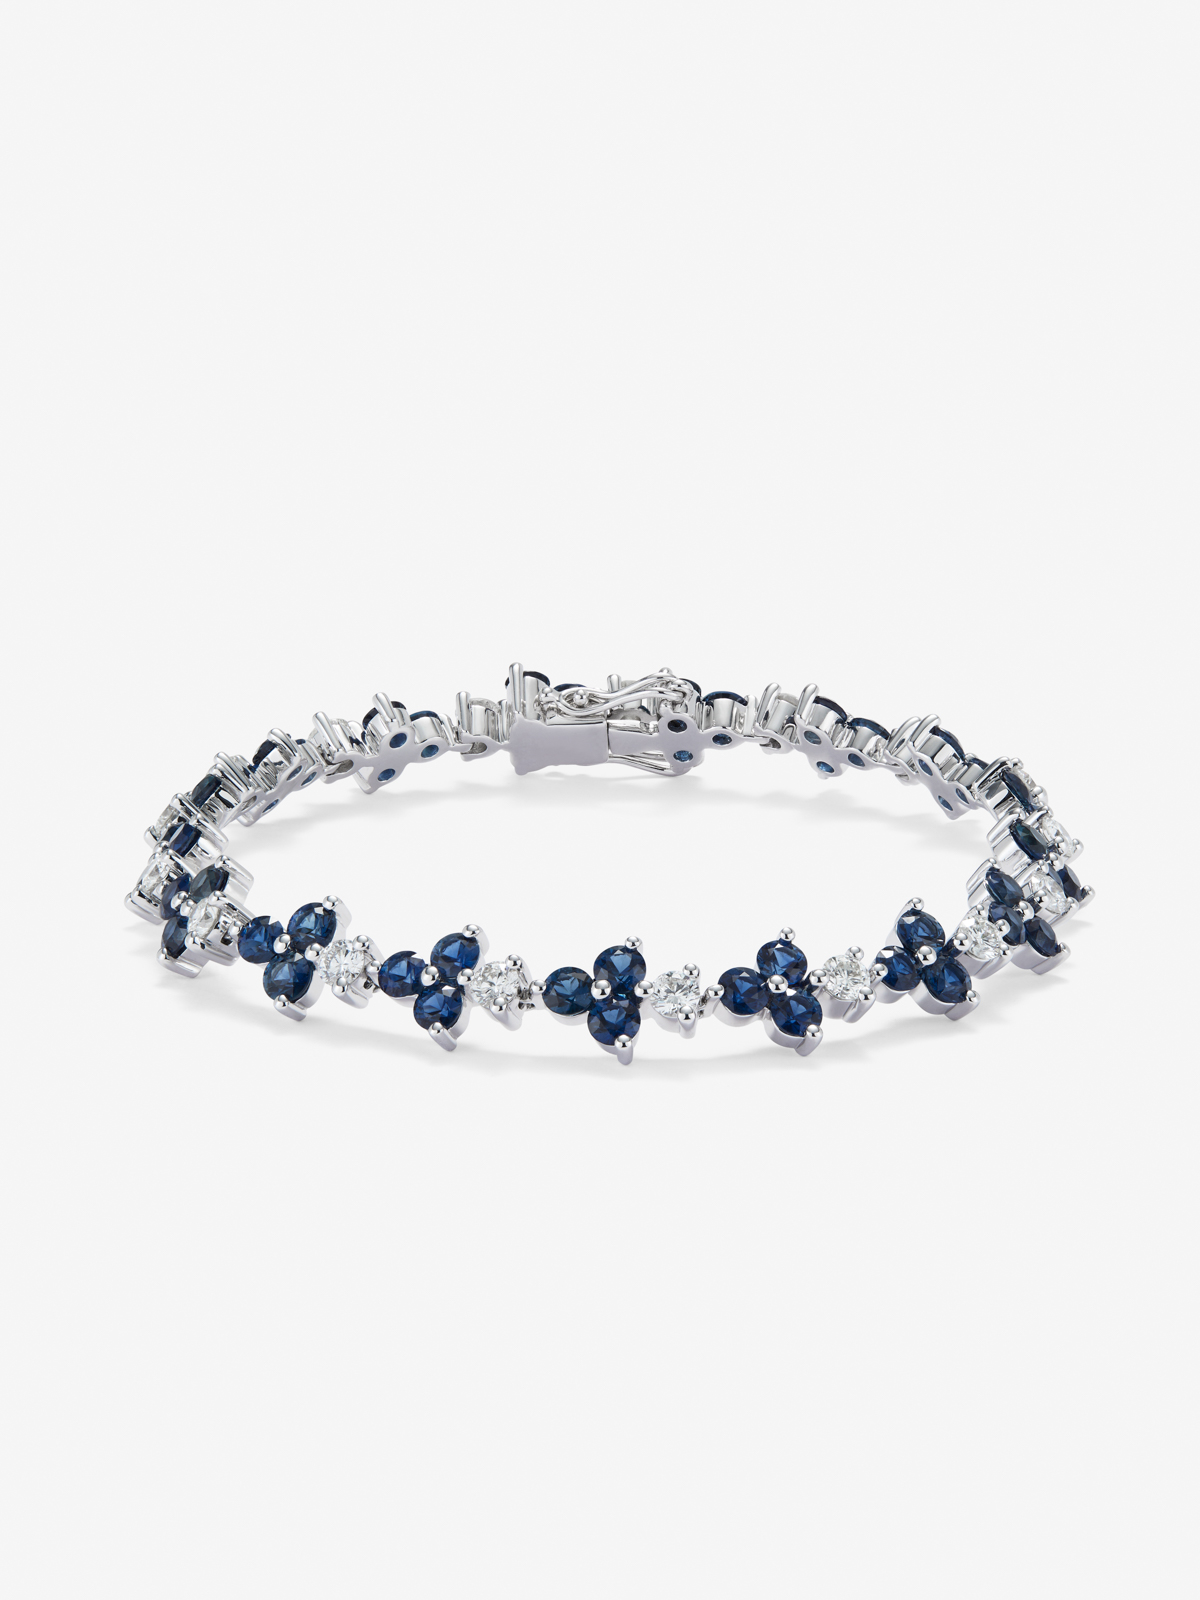 18K White Gold Rivière bracelet with Blue Zafiros in Blind Size 6.62 cts and White Diamonds in Bright Size of 2.85 CTS